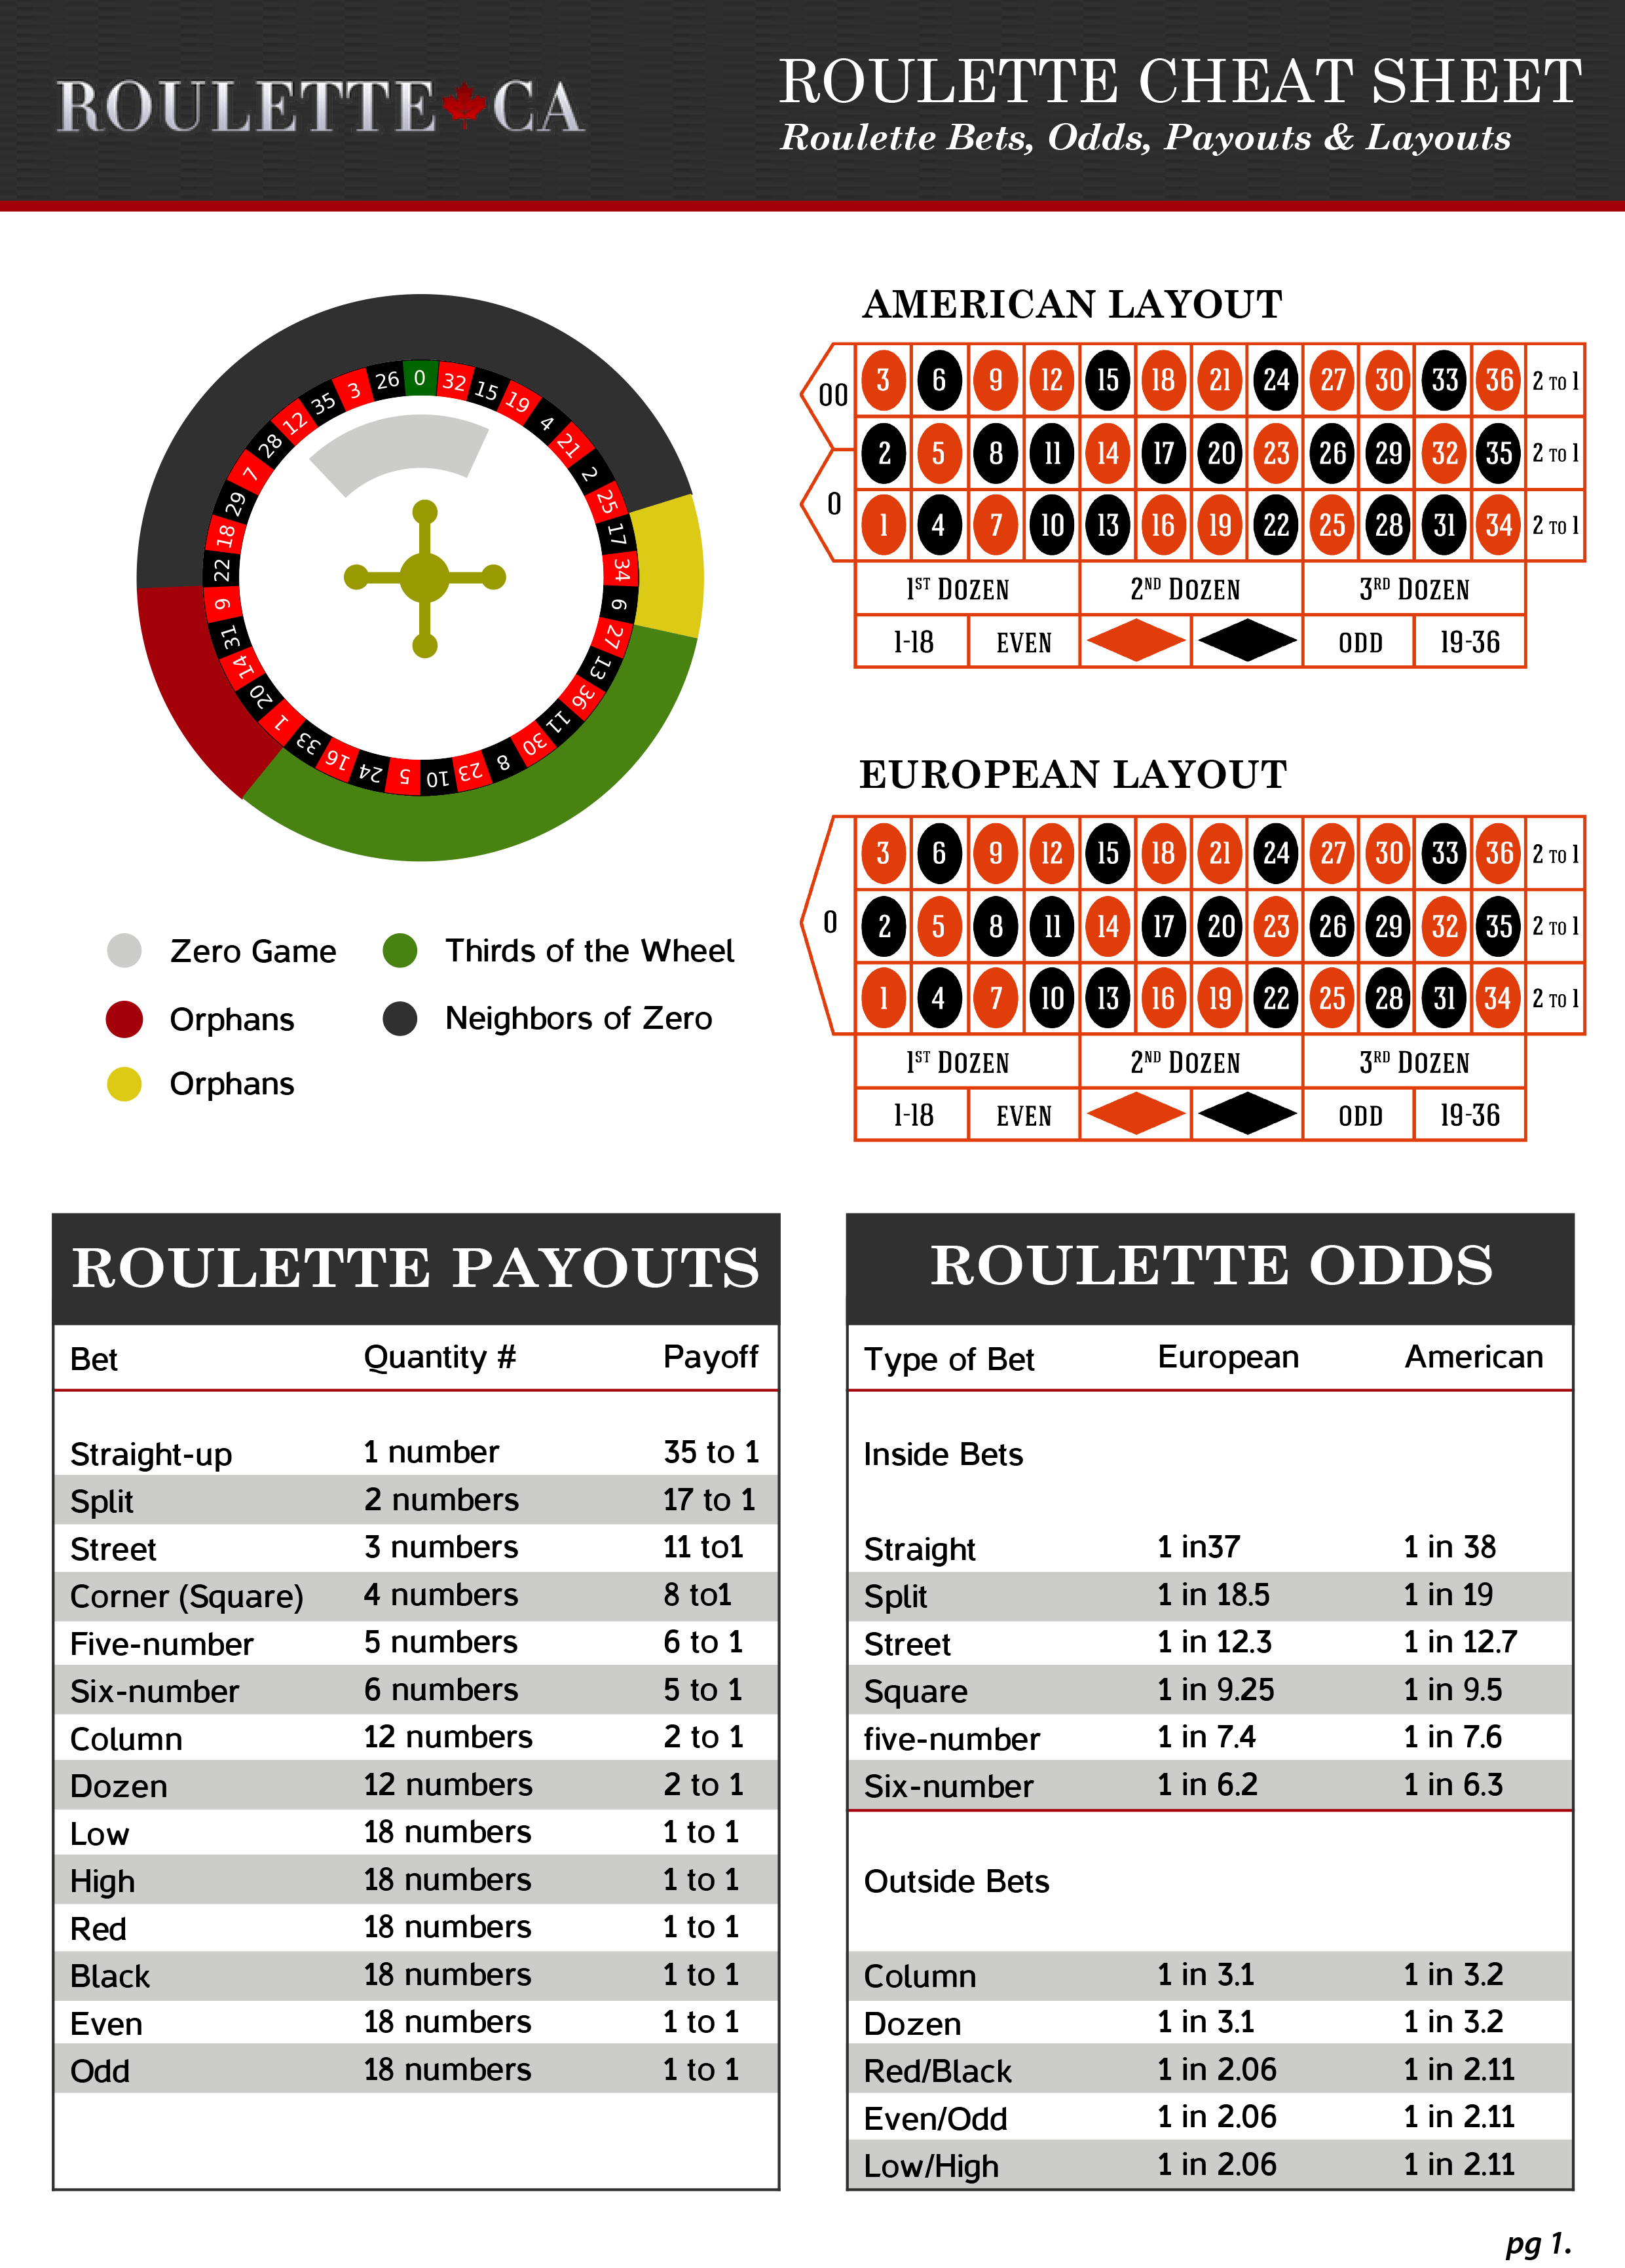 roulette red black odds